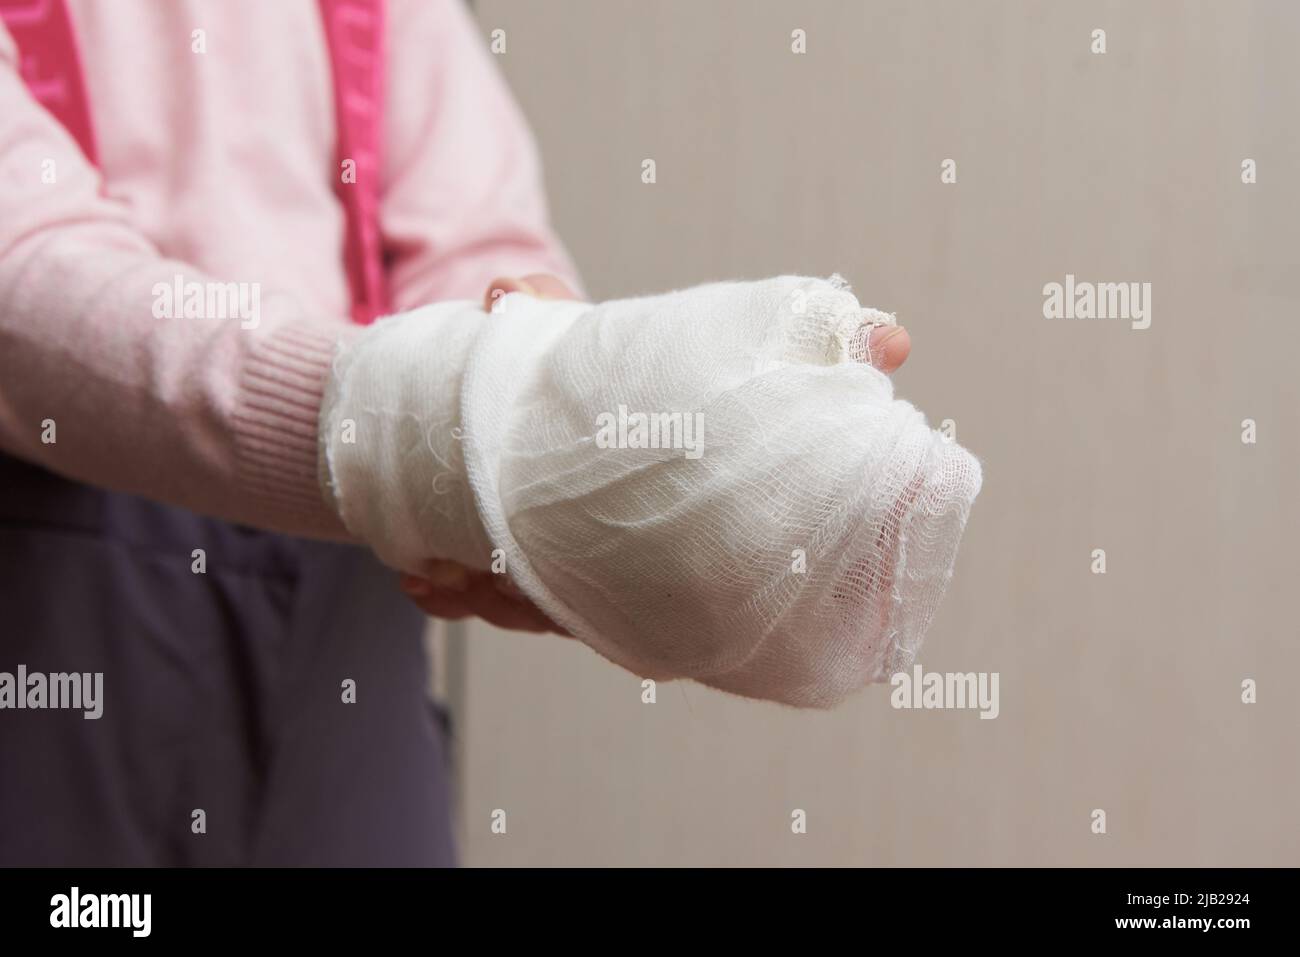 Children's hand in a medical plaster close-up Stock Photo